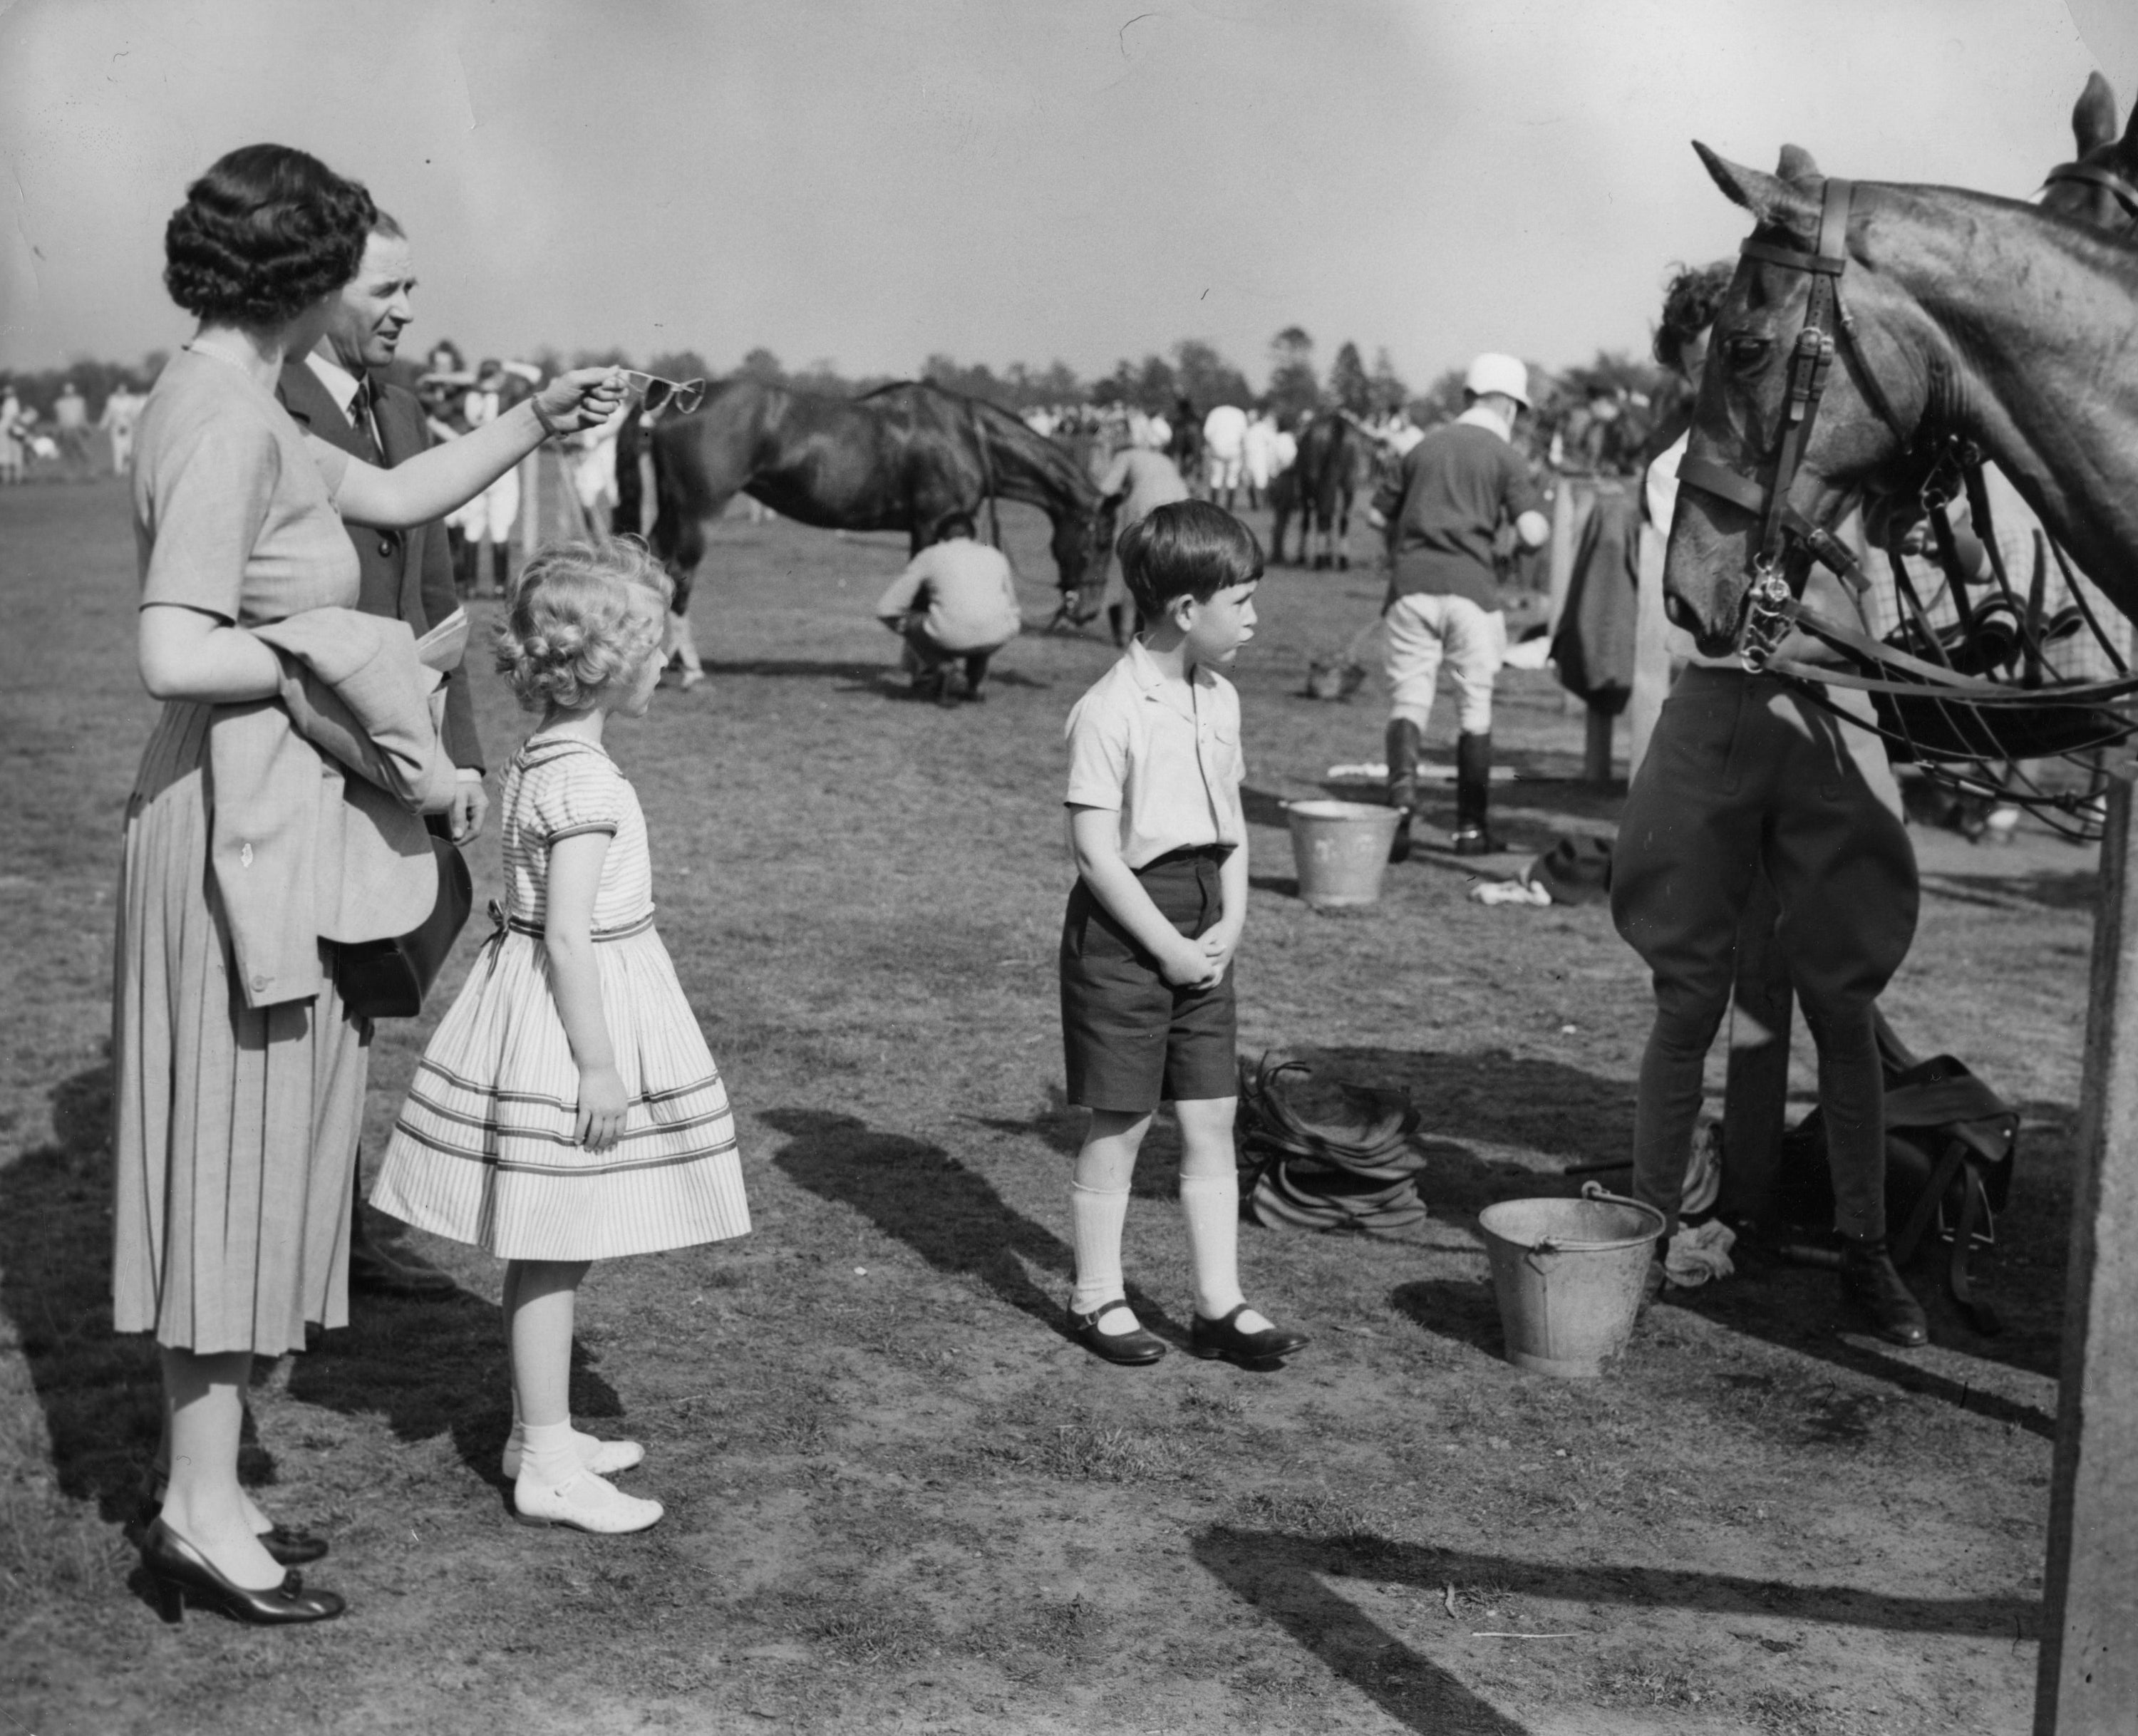 Queen Elizabeth II with Prince Charles and Princess Anne visiting the polo ponies during a break in the polo tournament, in which the Duke of Edinburgh was playing at Smith’s Lawn in Windsor Great Park in 1956 (PA Archive)